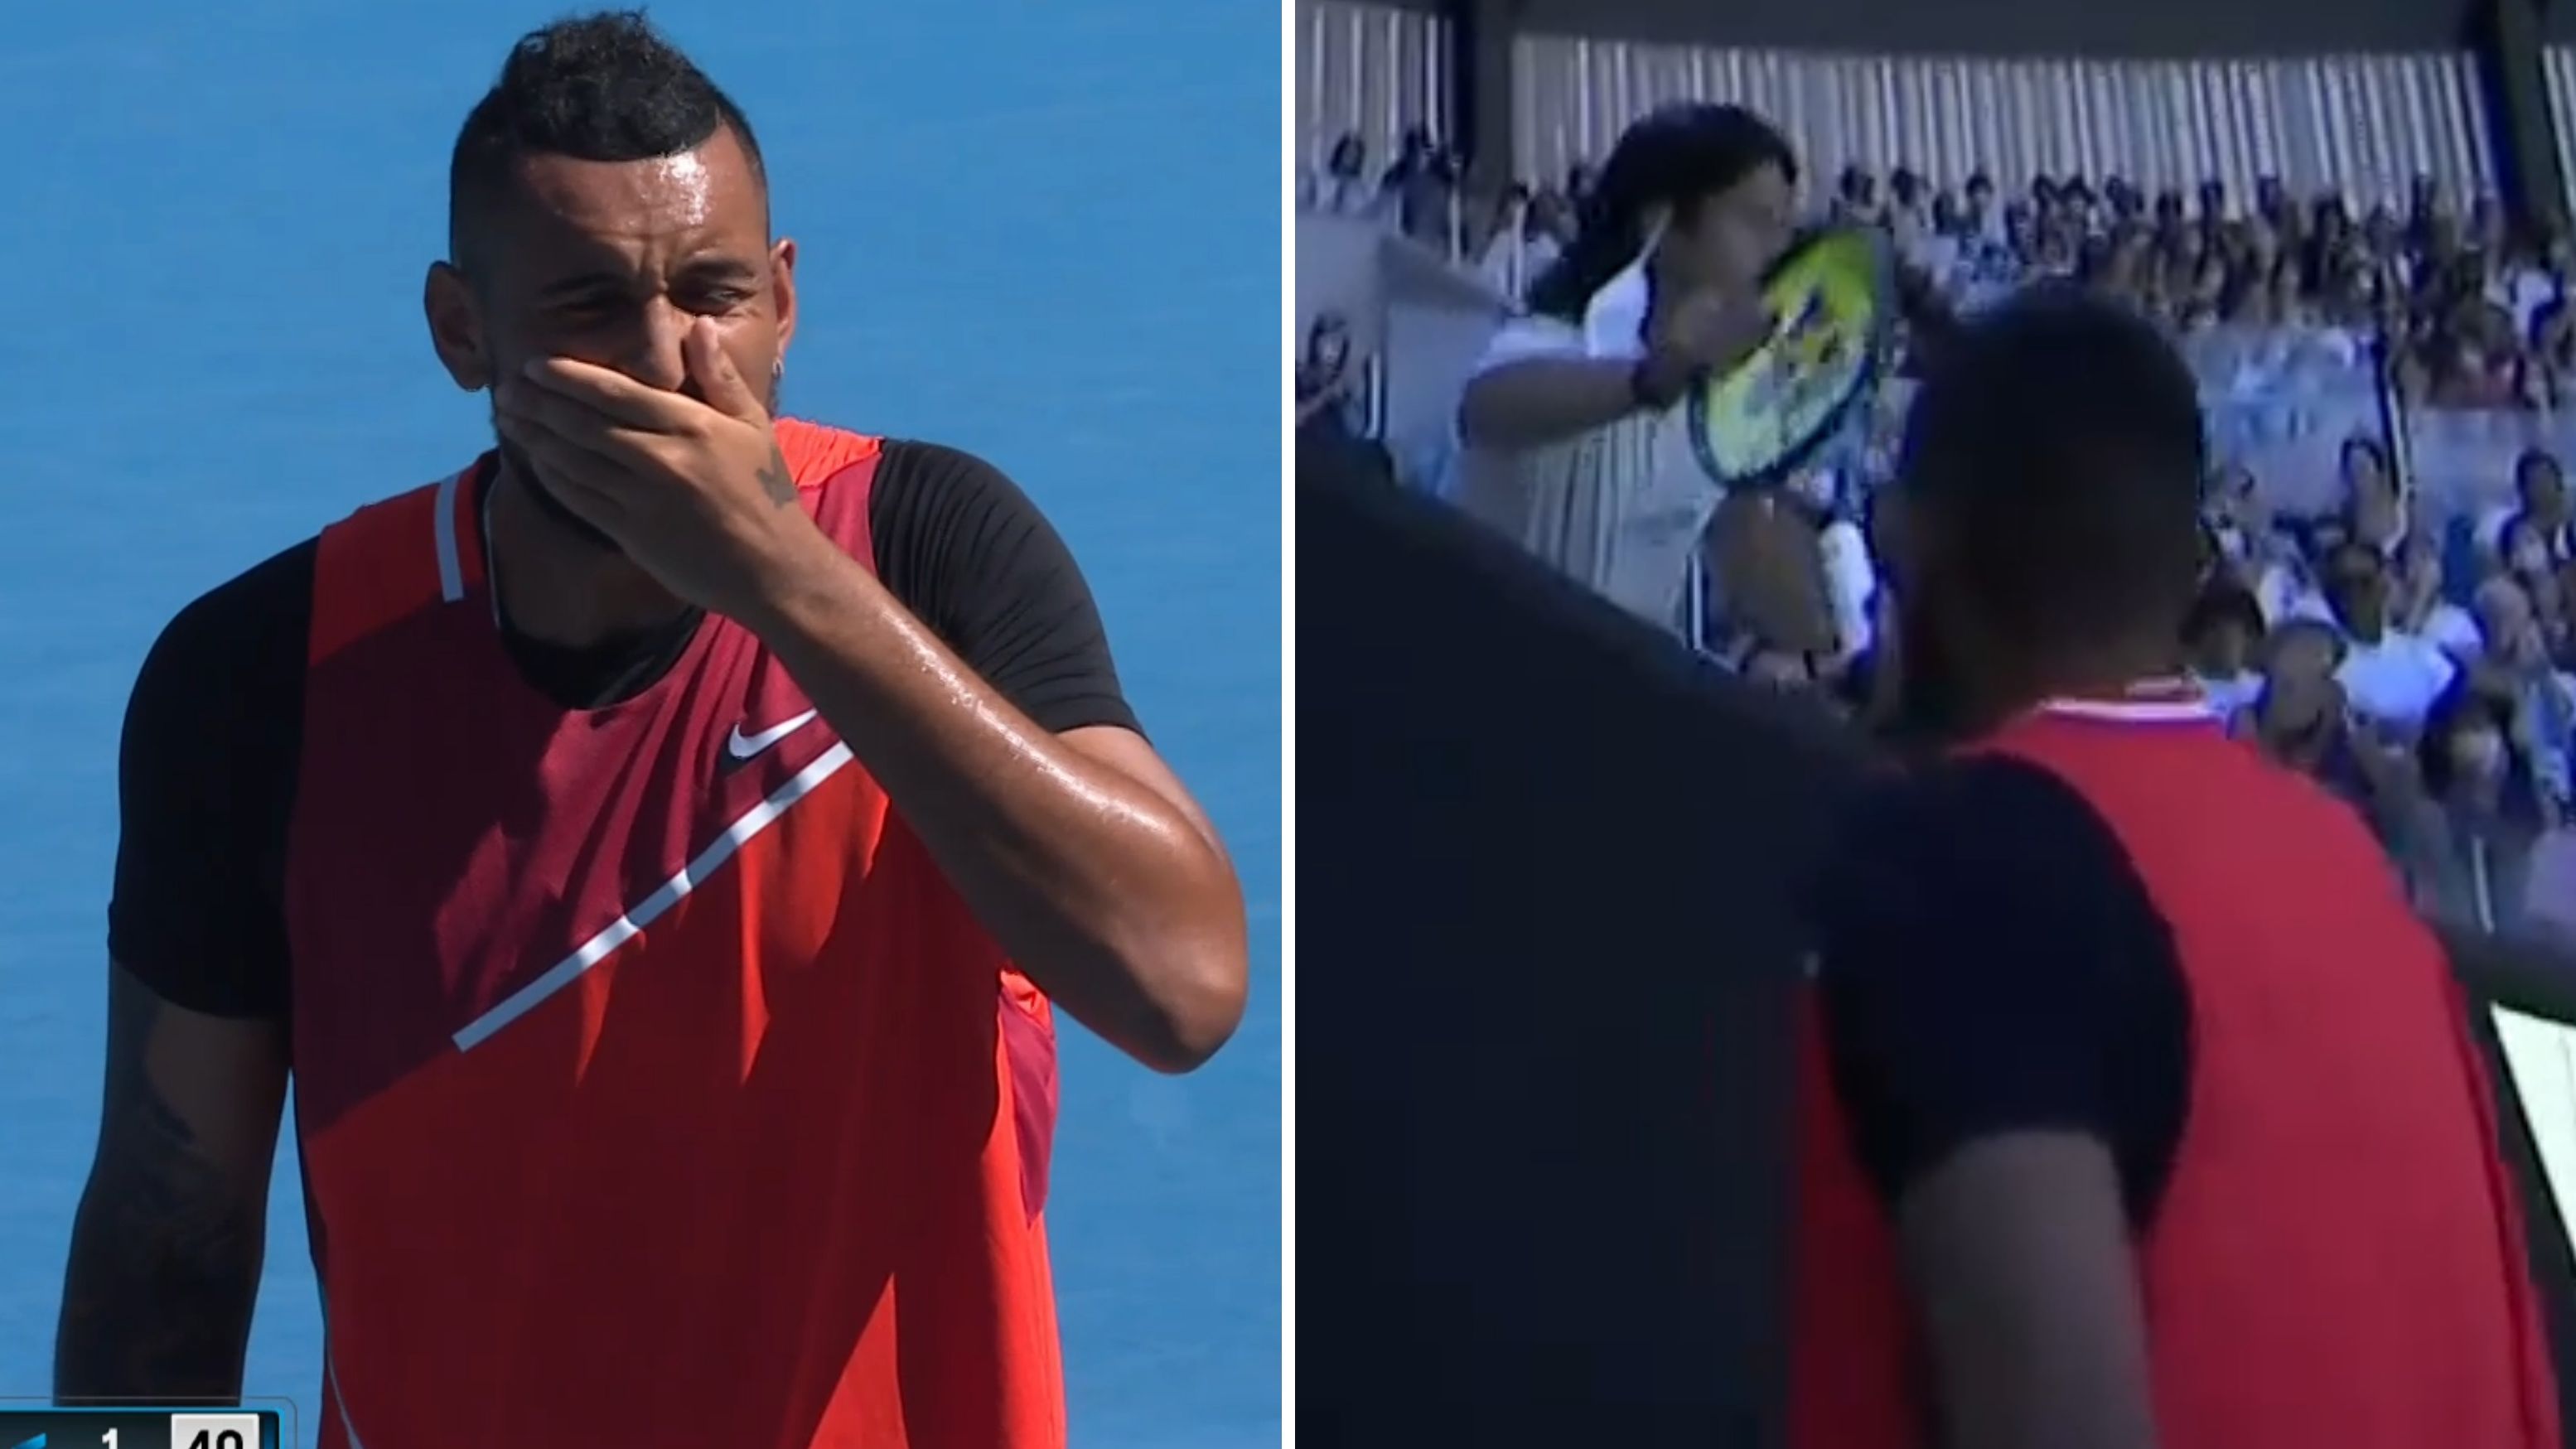 Nick Kyrgios gives racquet to young fan he accidentally hit with ball